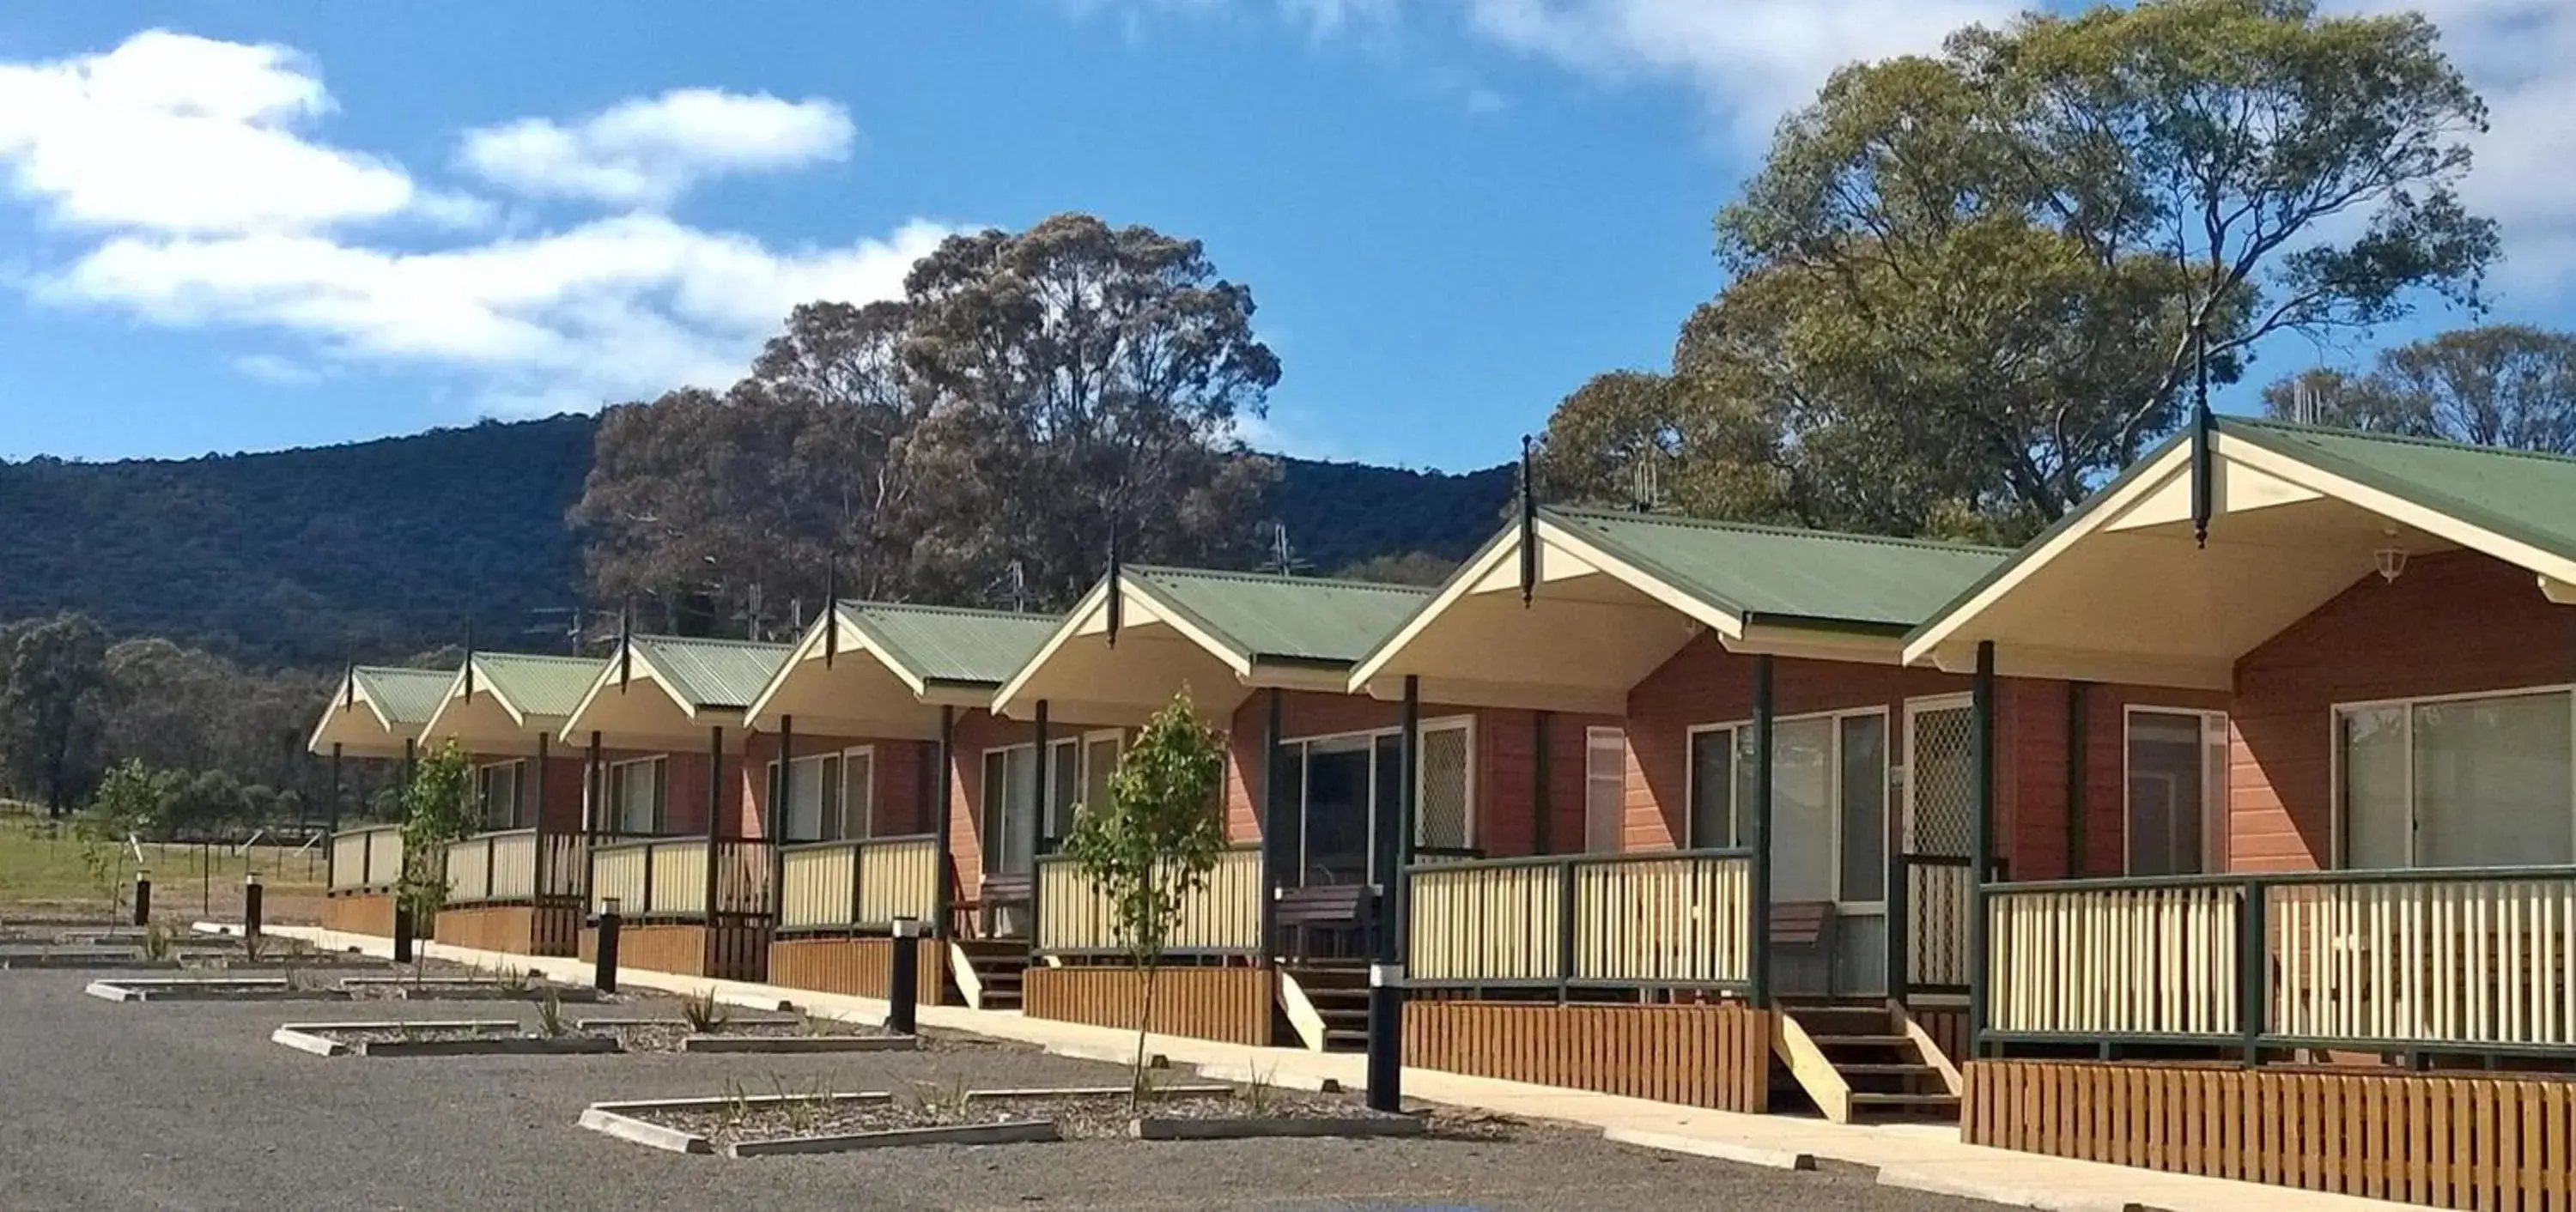 Property Building in Canberra Carotel Motel